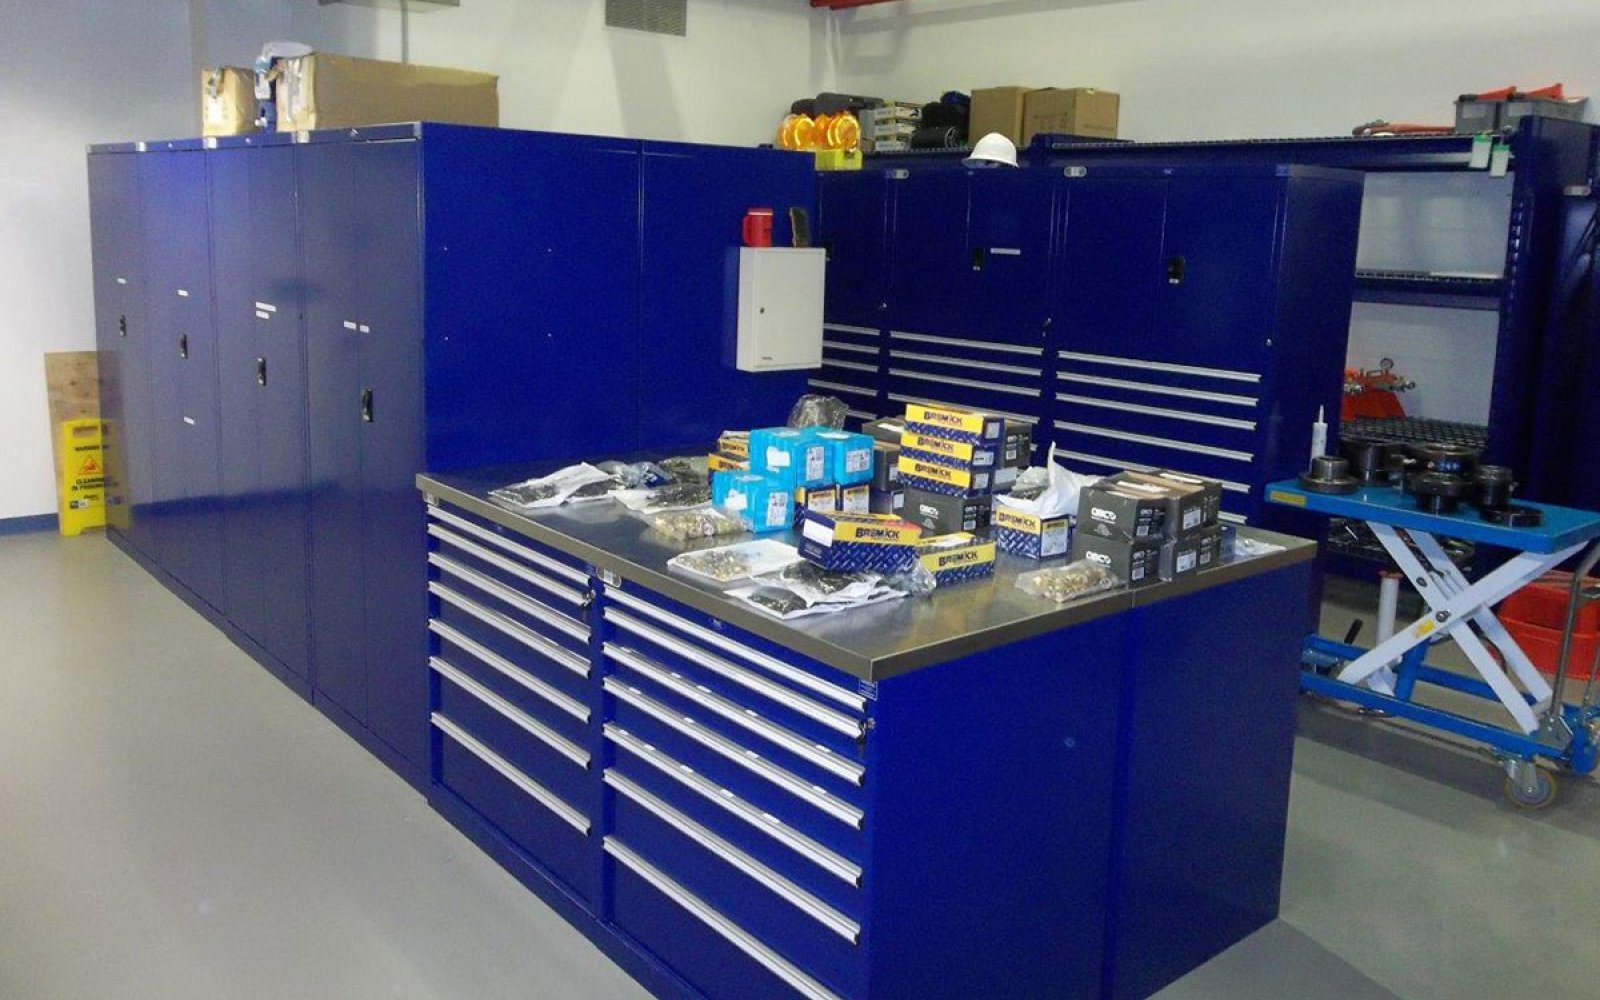 Tool Stores with BAC workstations and tool drawers